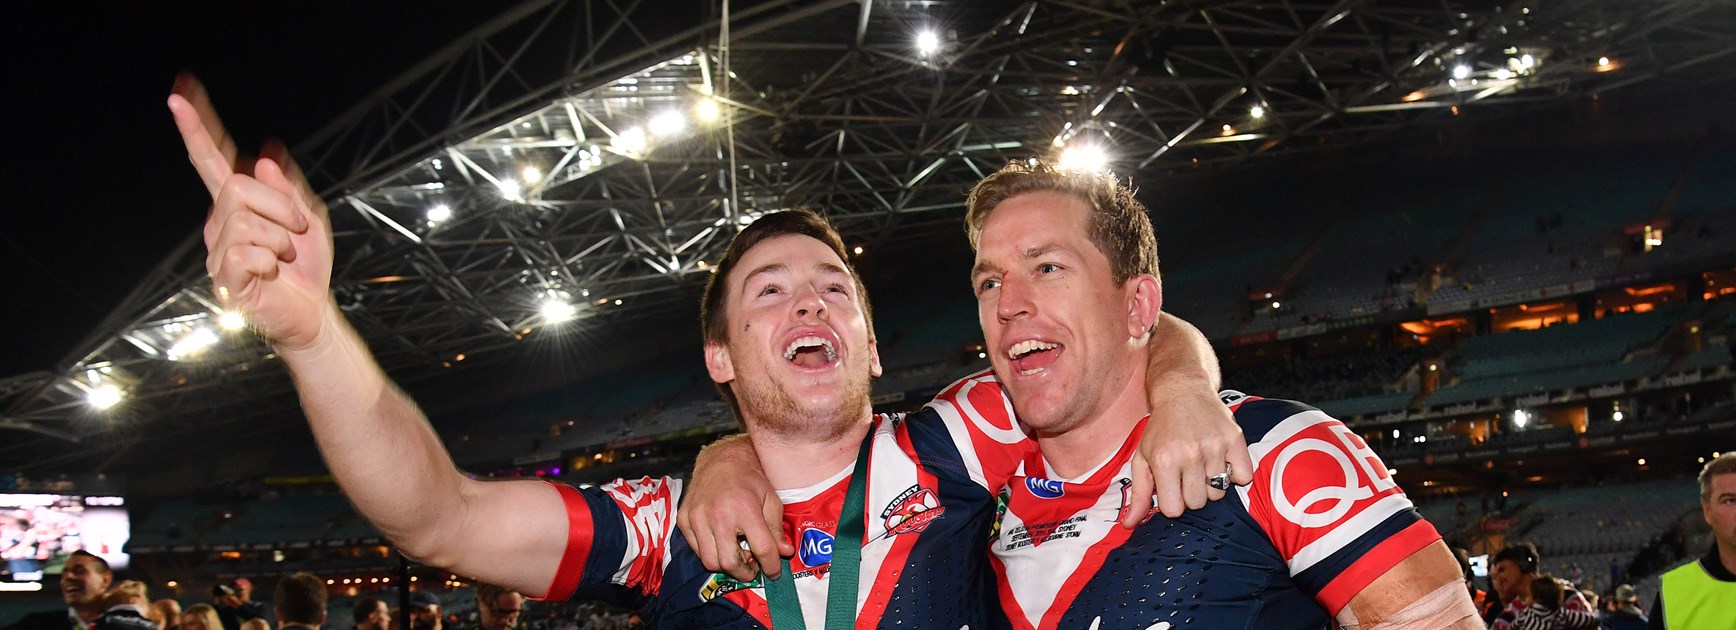 Mitch craft: Aubusson one of the greatest Roosters, says Keary